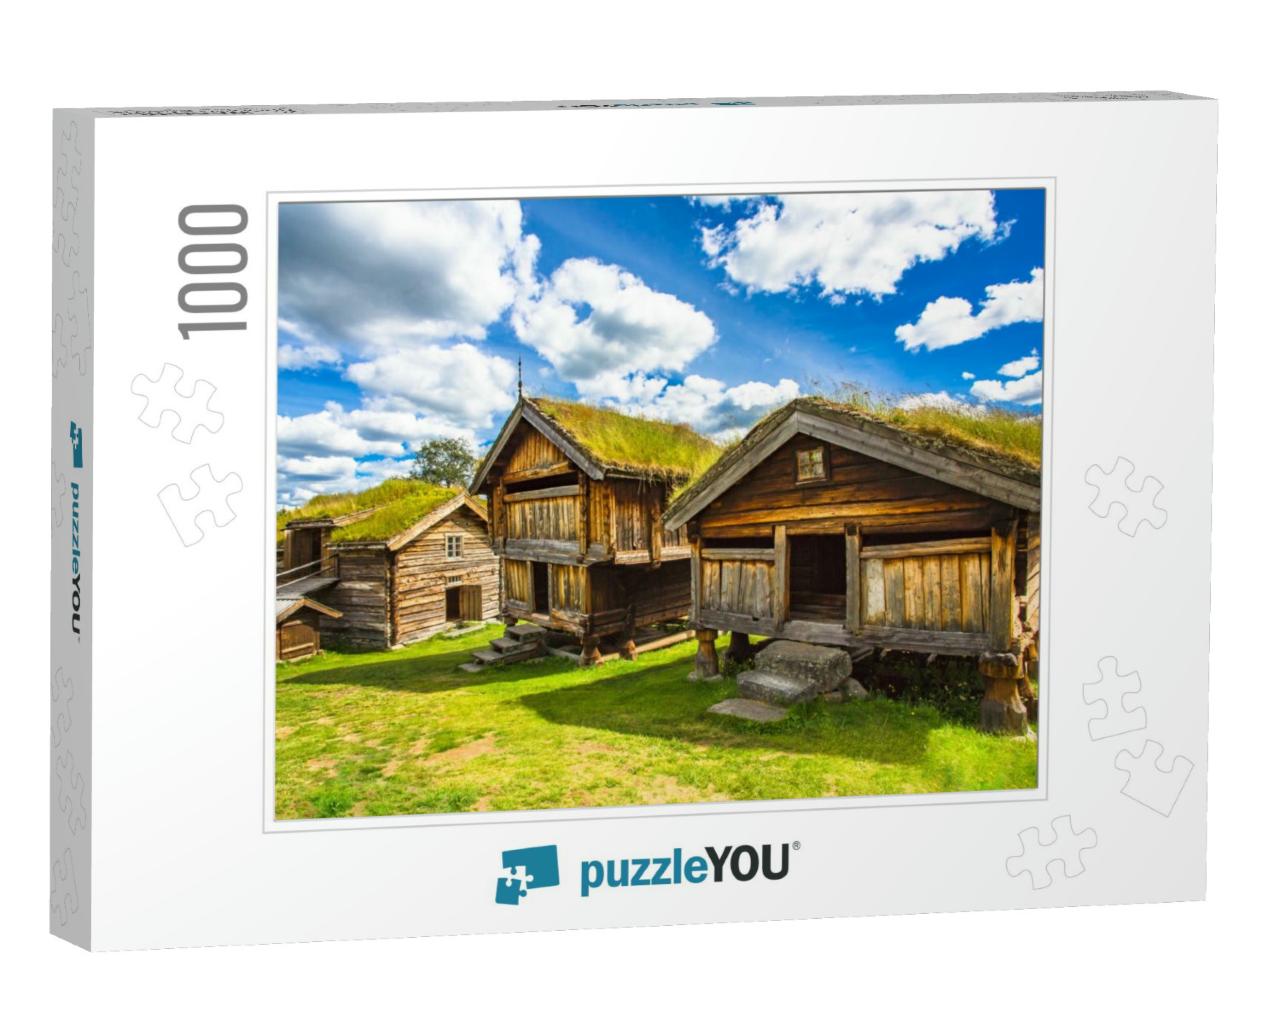 Old Traditional Norwegian Houses. Geilo, Norway... Jigsaw Puzzle with 1000 pieces